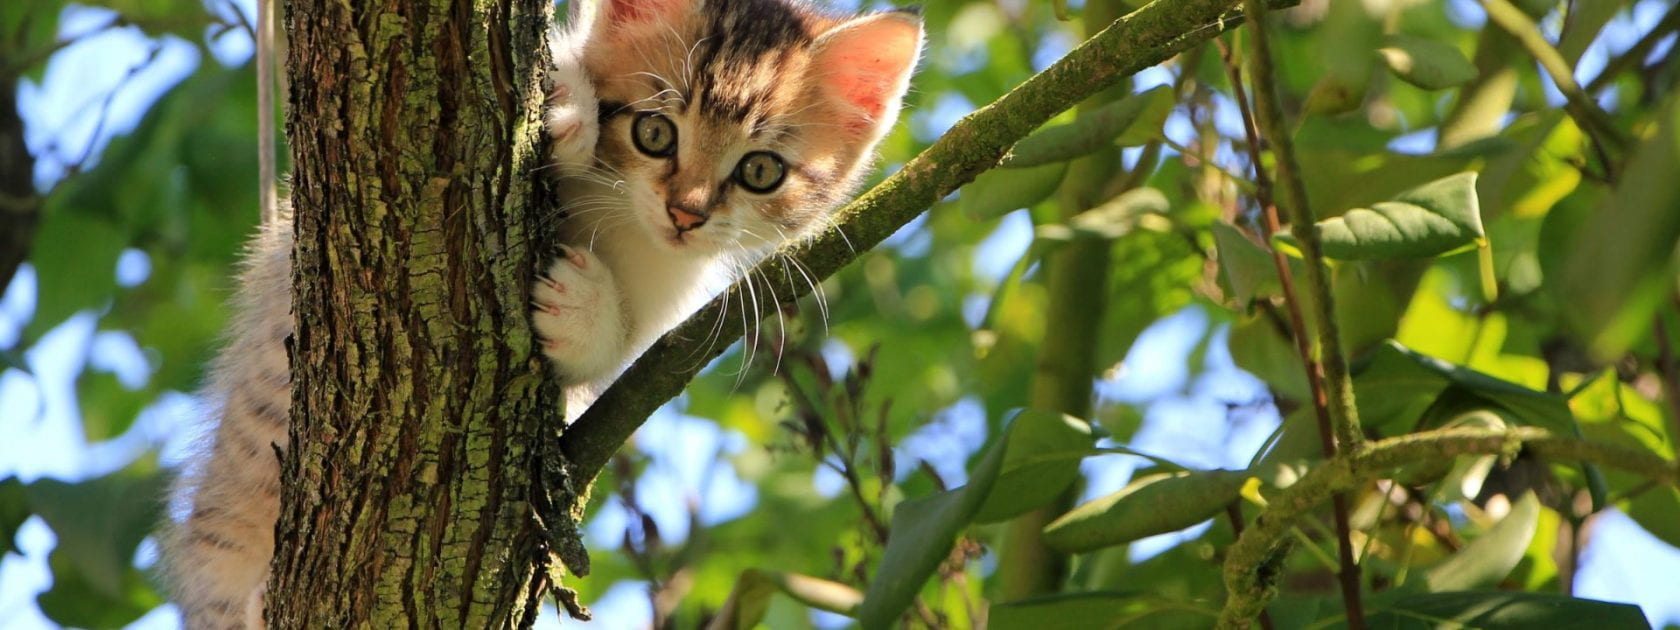 Photo of a calico kitten in a tree